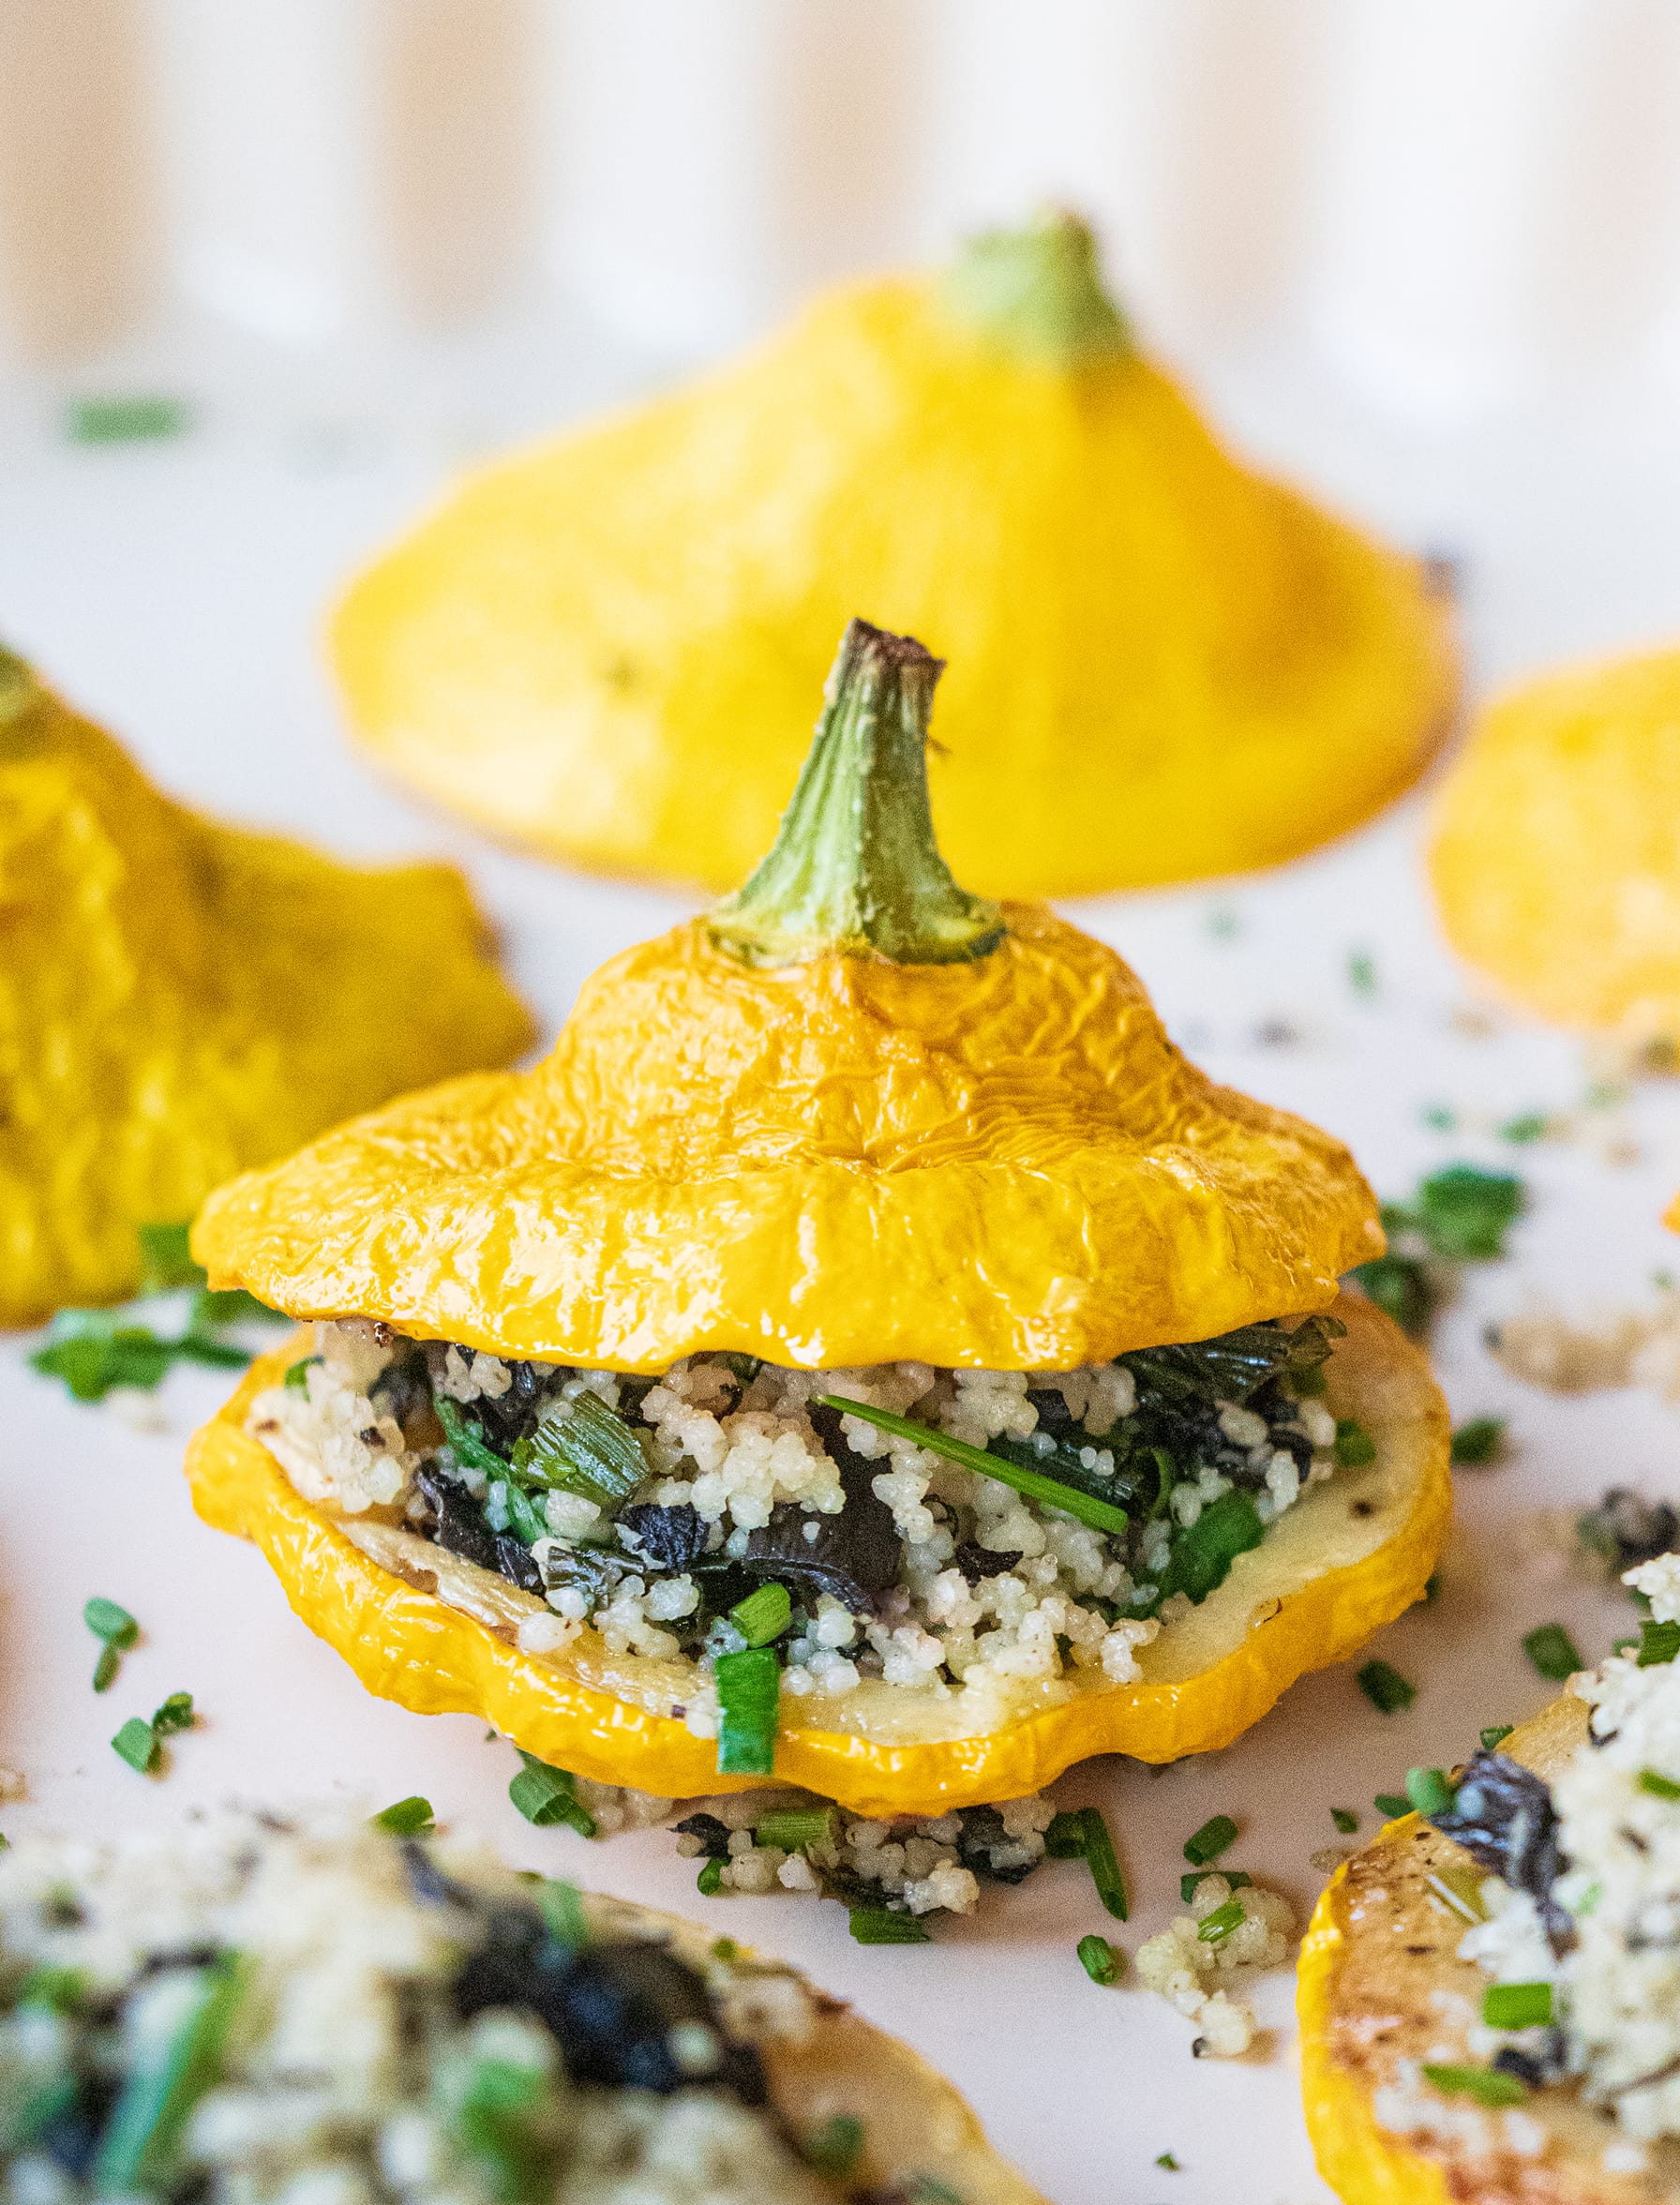 Stuffed Patty Pans with Black Trumpets | Recipe by FUNGIWOMAN